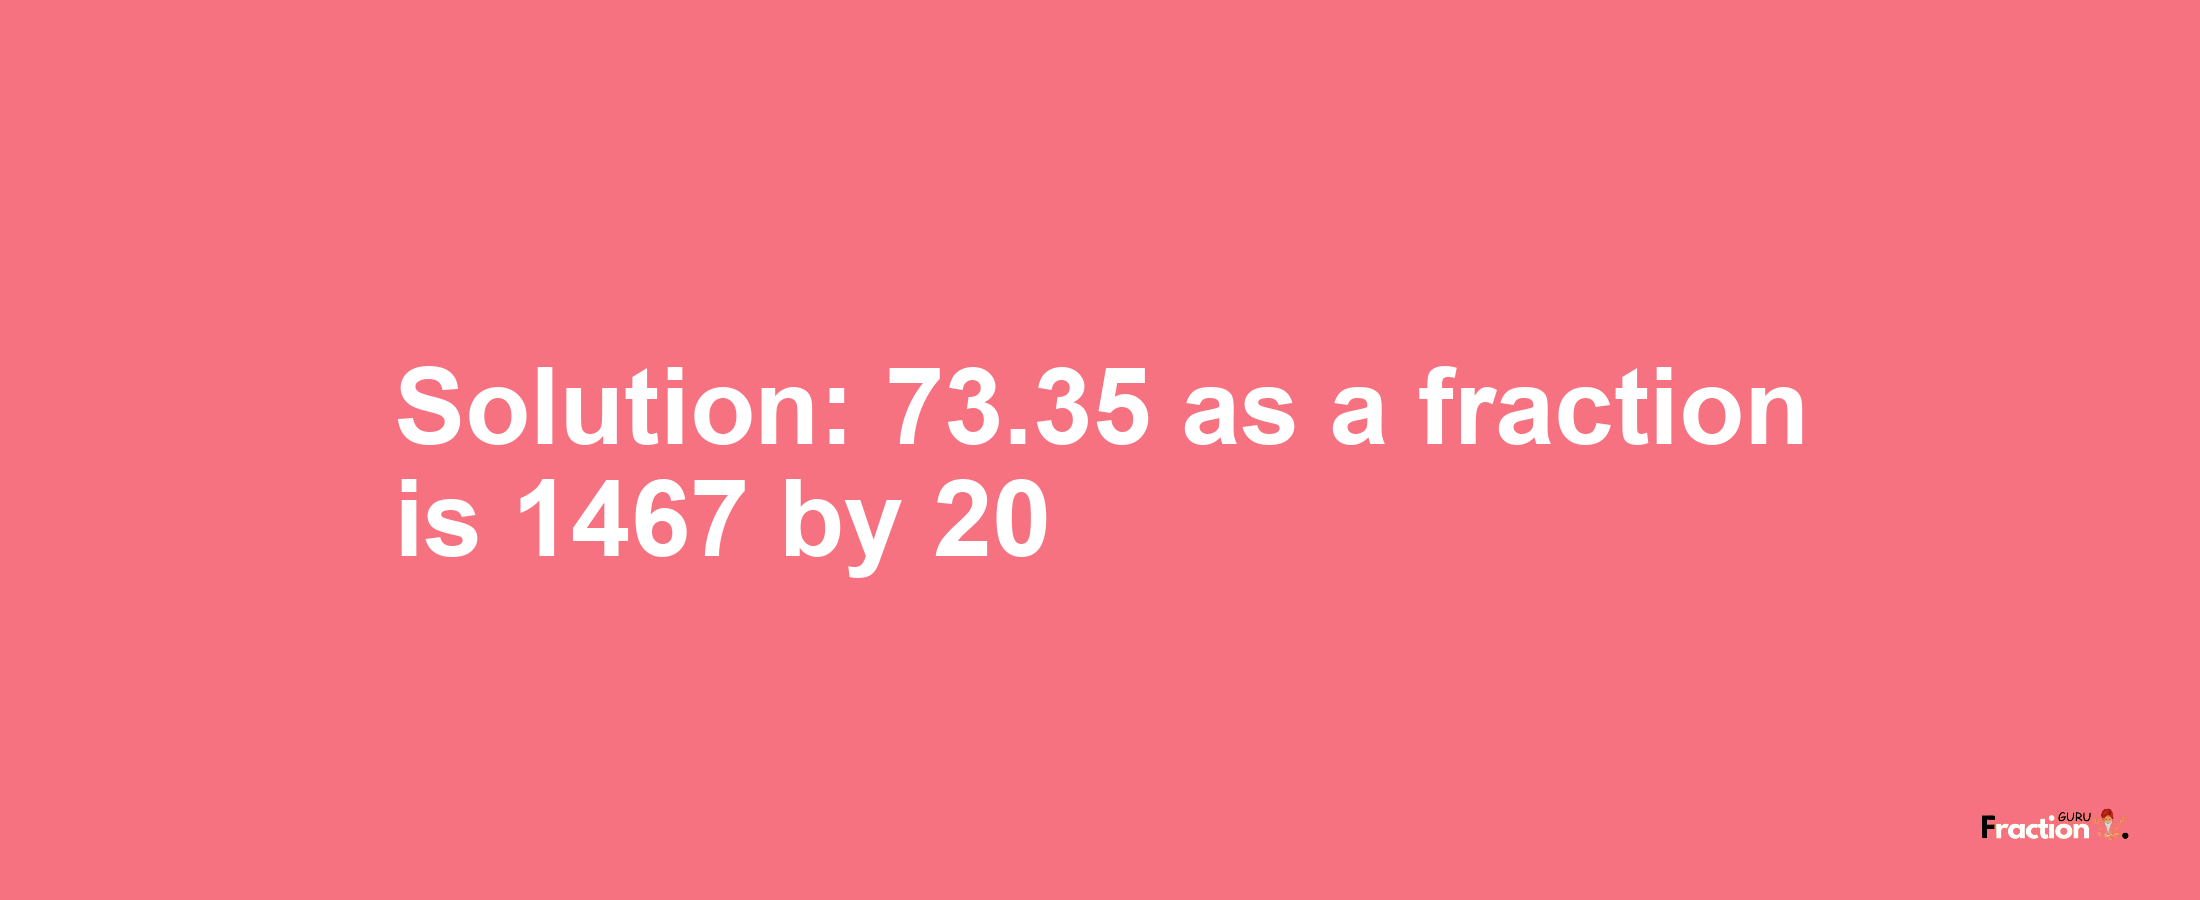 Solution:73.35 as a fraction is 1467/20